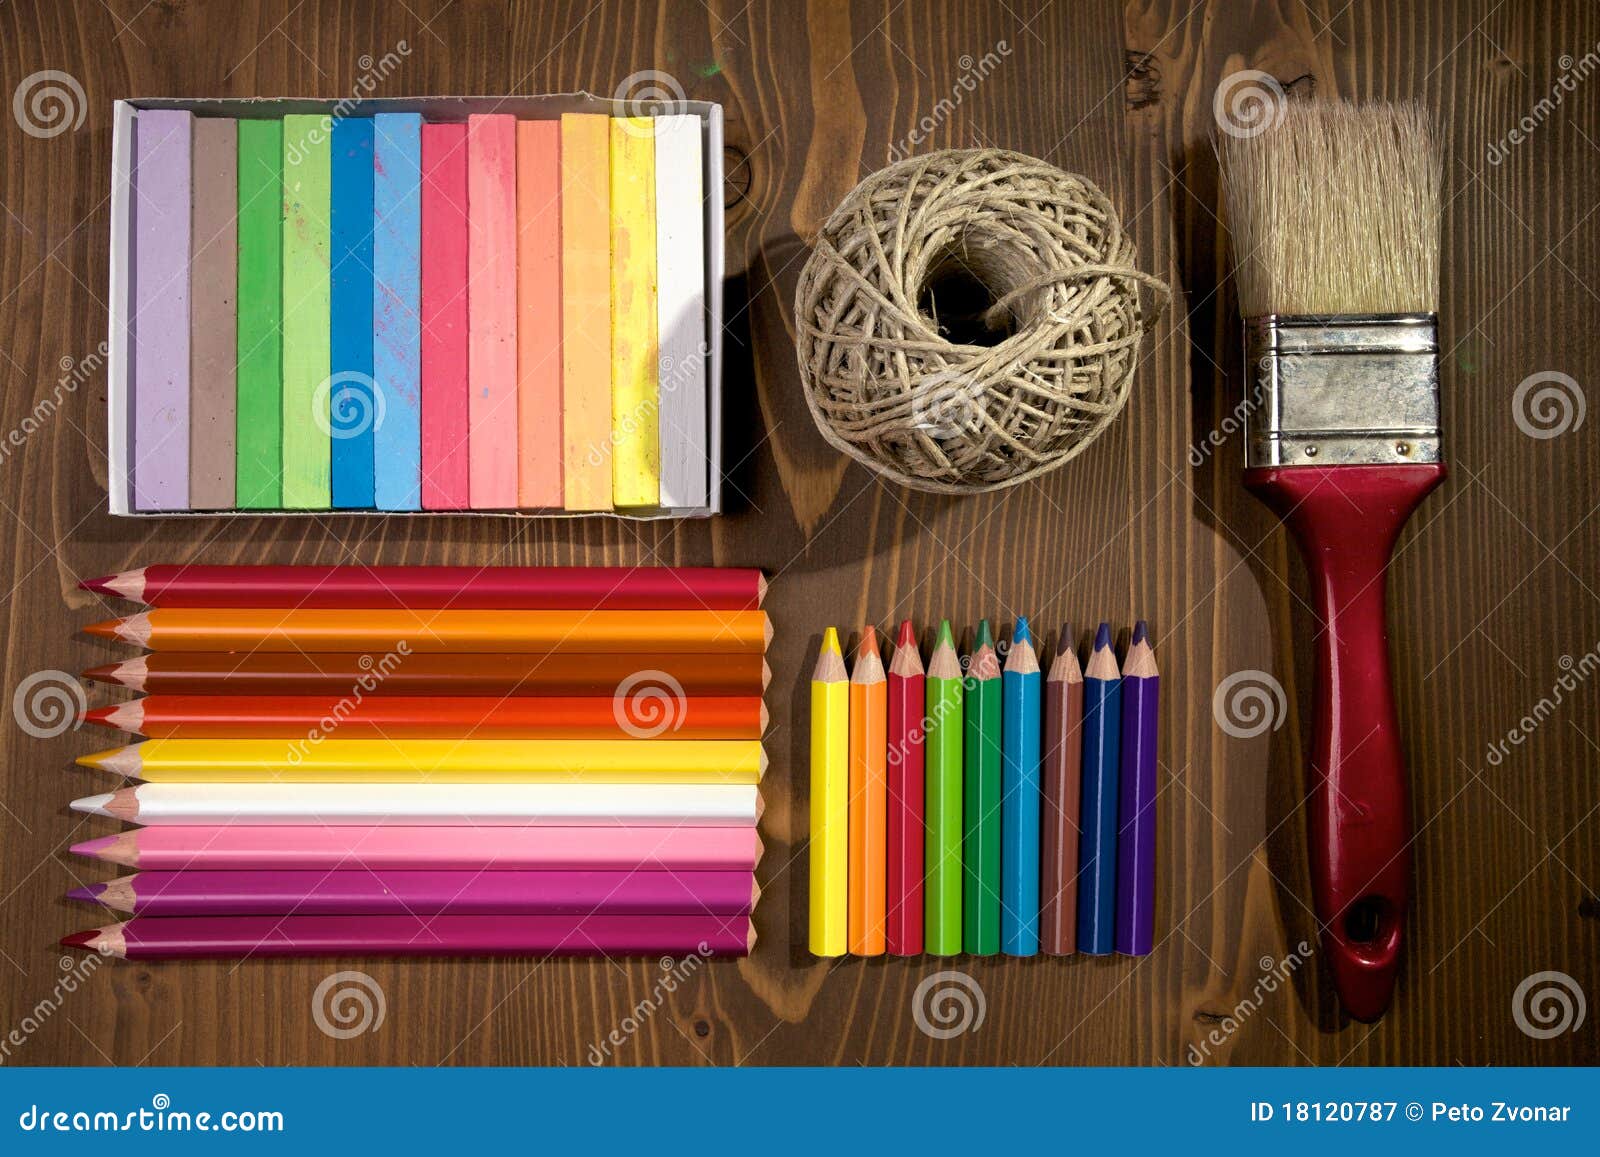 Arts And Crafts Royalty Free Stock Photography - Image: 18120787